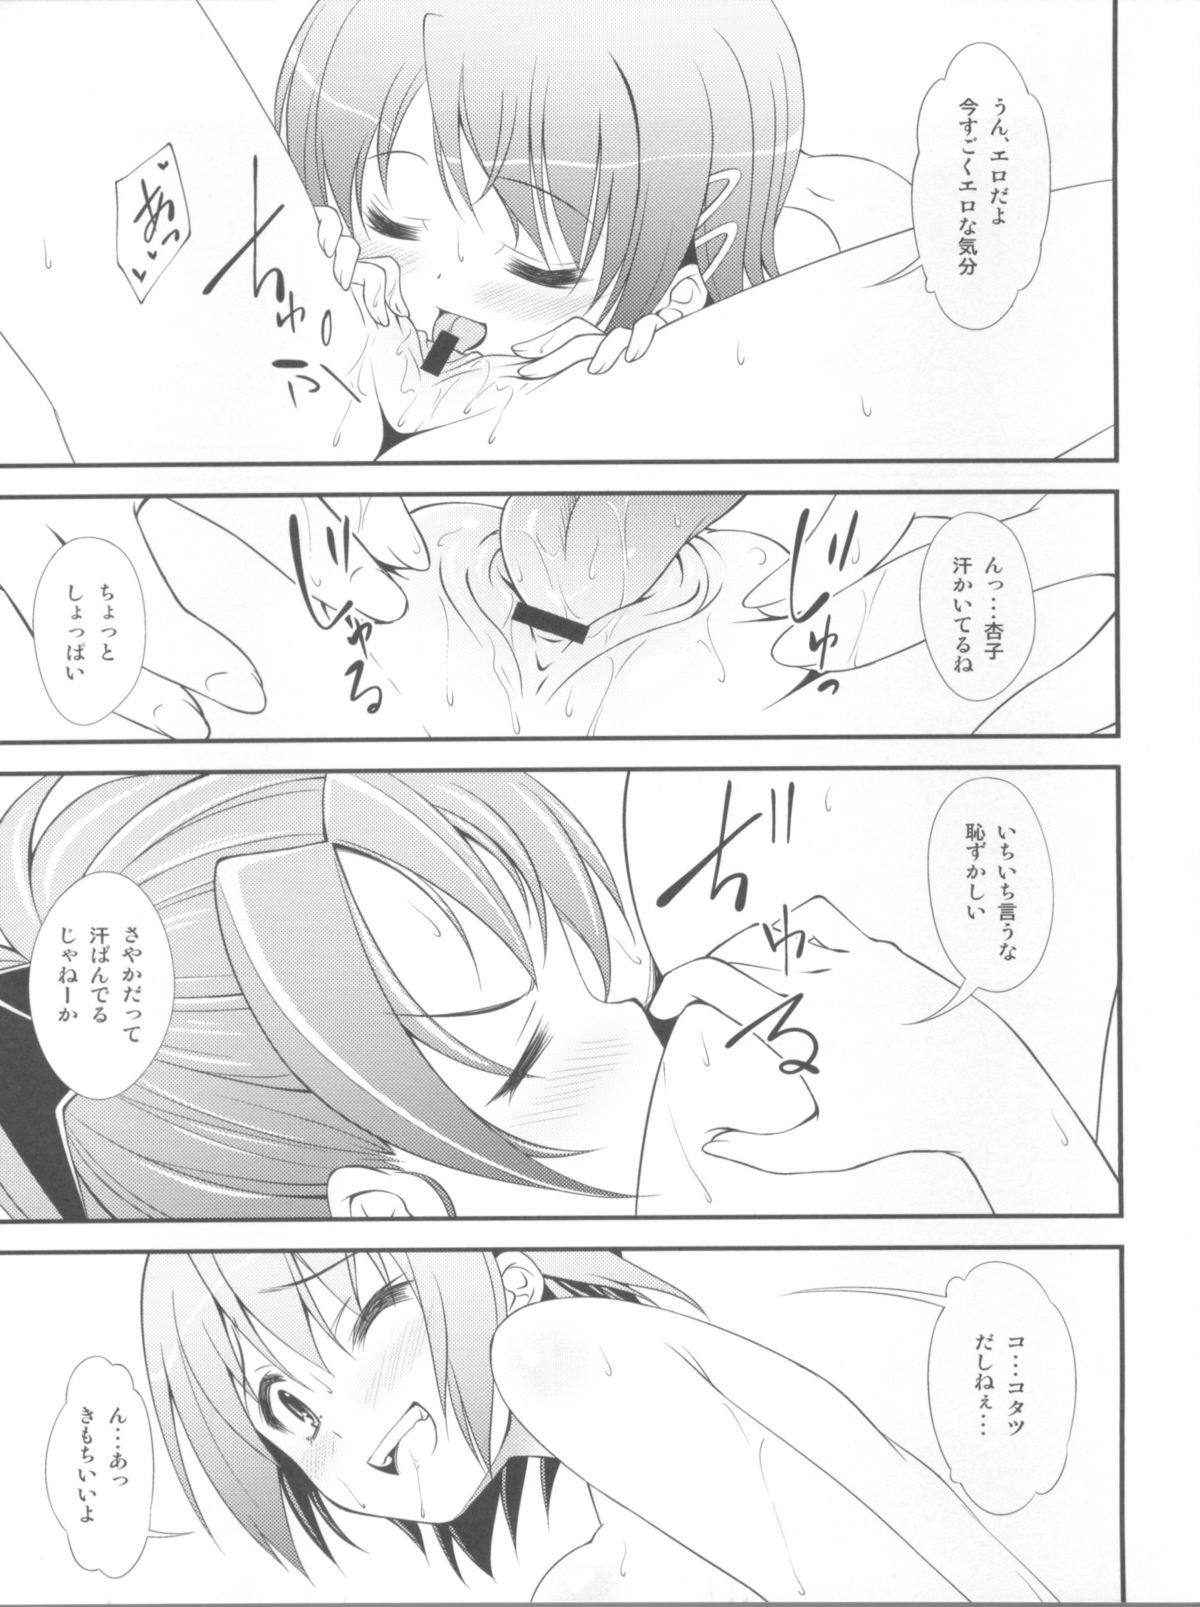 Assfucking Lovely Girls' Lily vol.3 - Puella magi madoka magica Anal Creampie - Page 12